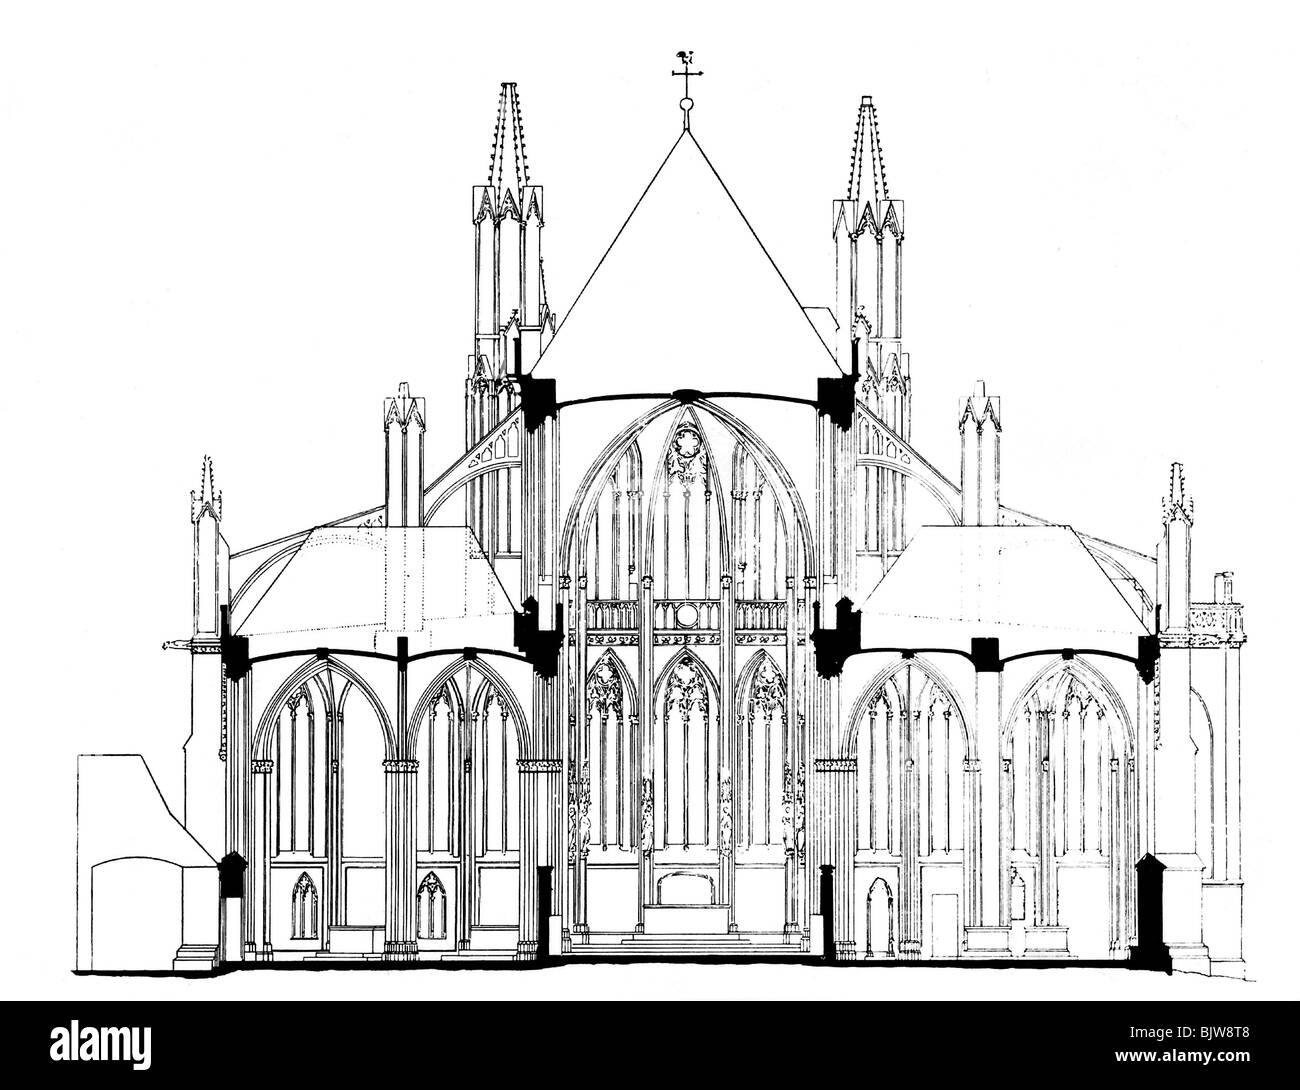 Architecture Ground Plan Cross Section Of A Gothic Cathedral